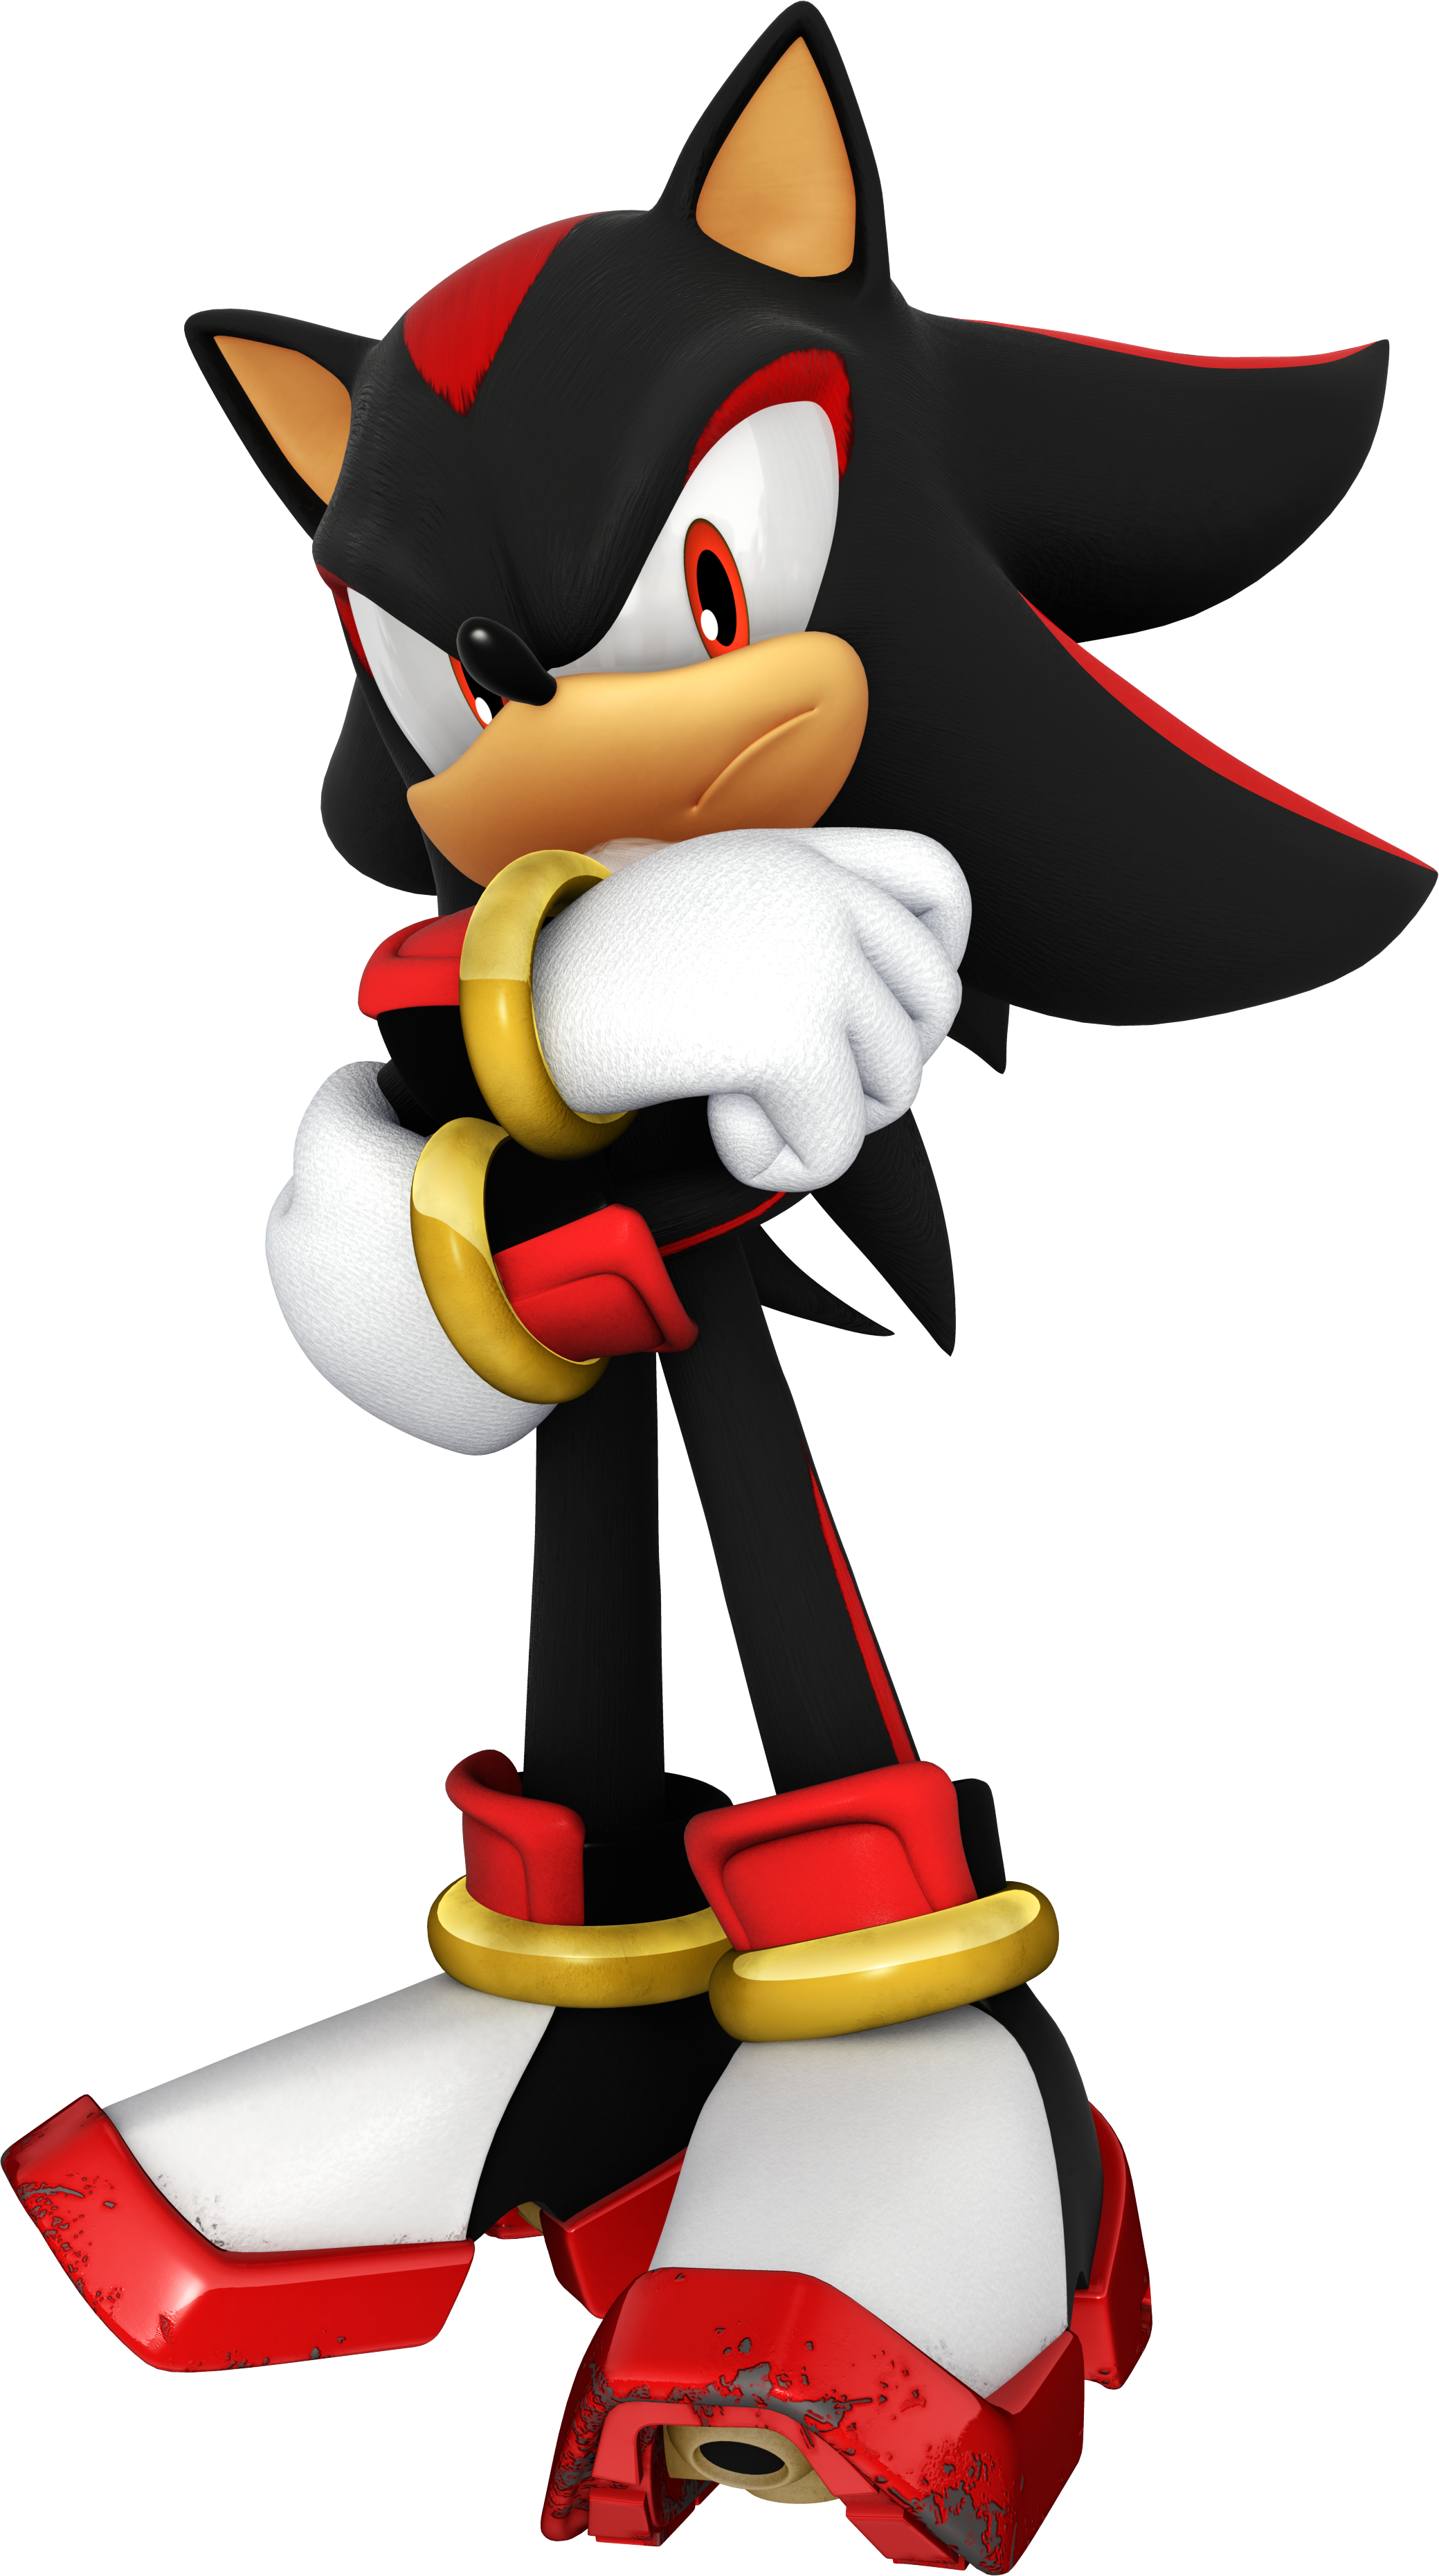 http://img1.wikia.nocookie.net/__cb20140424191018/sonic/es/images/6/66/CG_Shadow_11.png